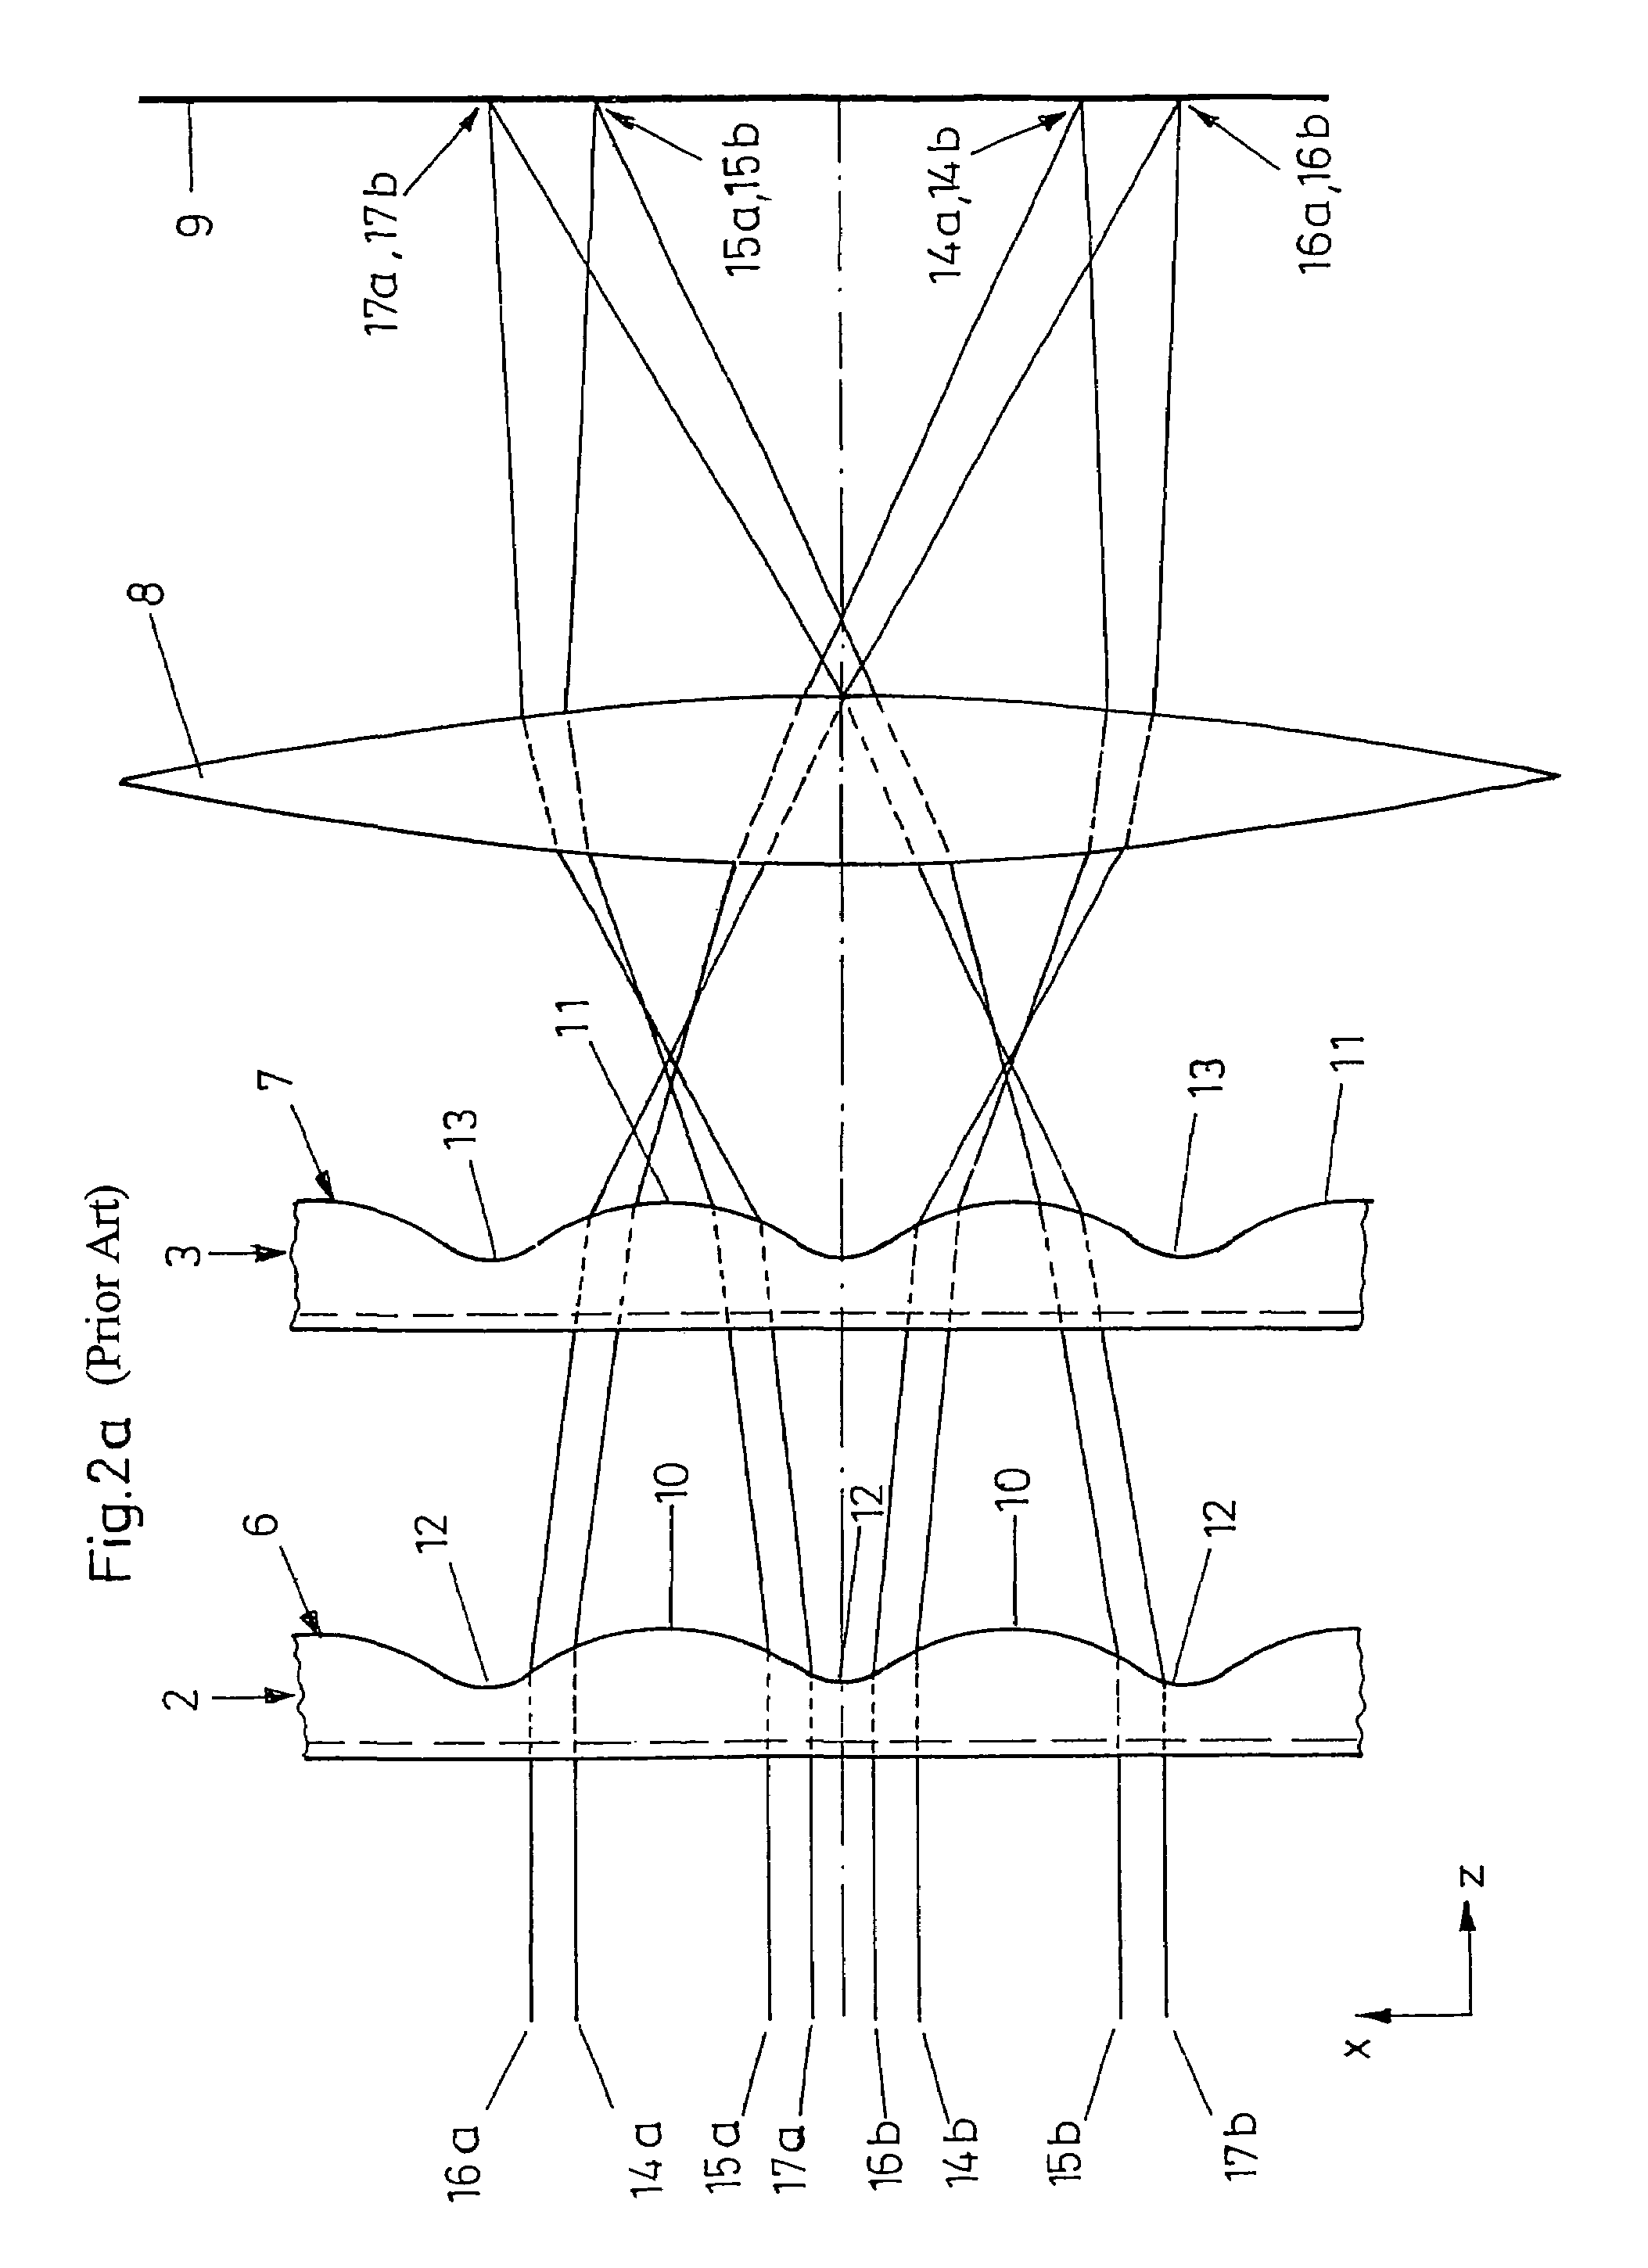 Apparatus for shaping a light beam